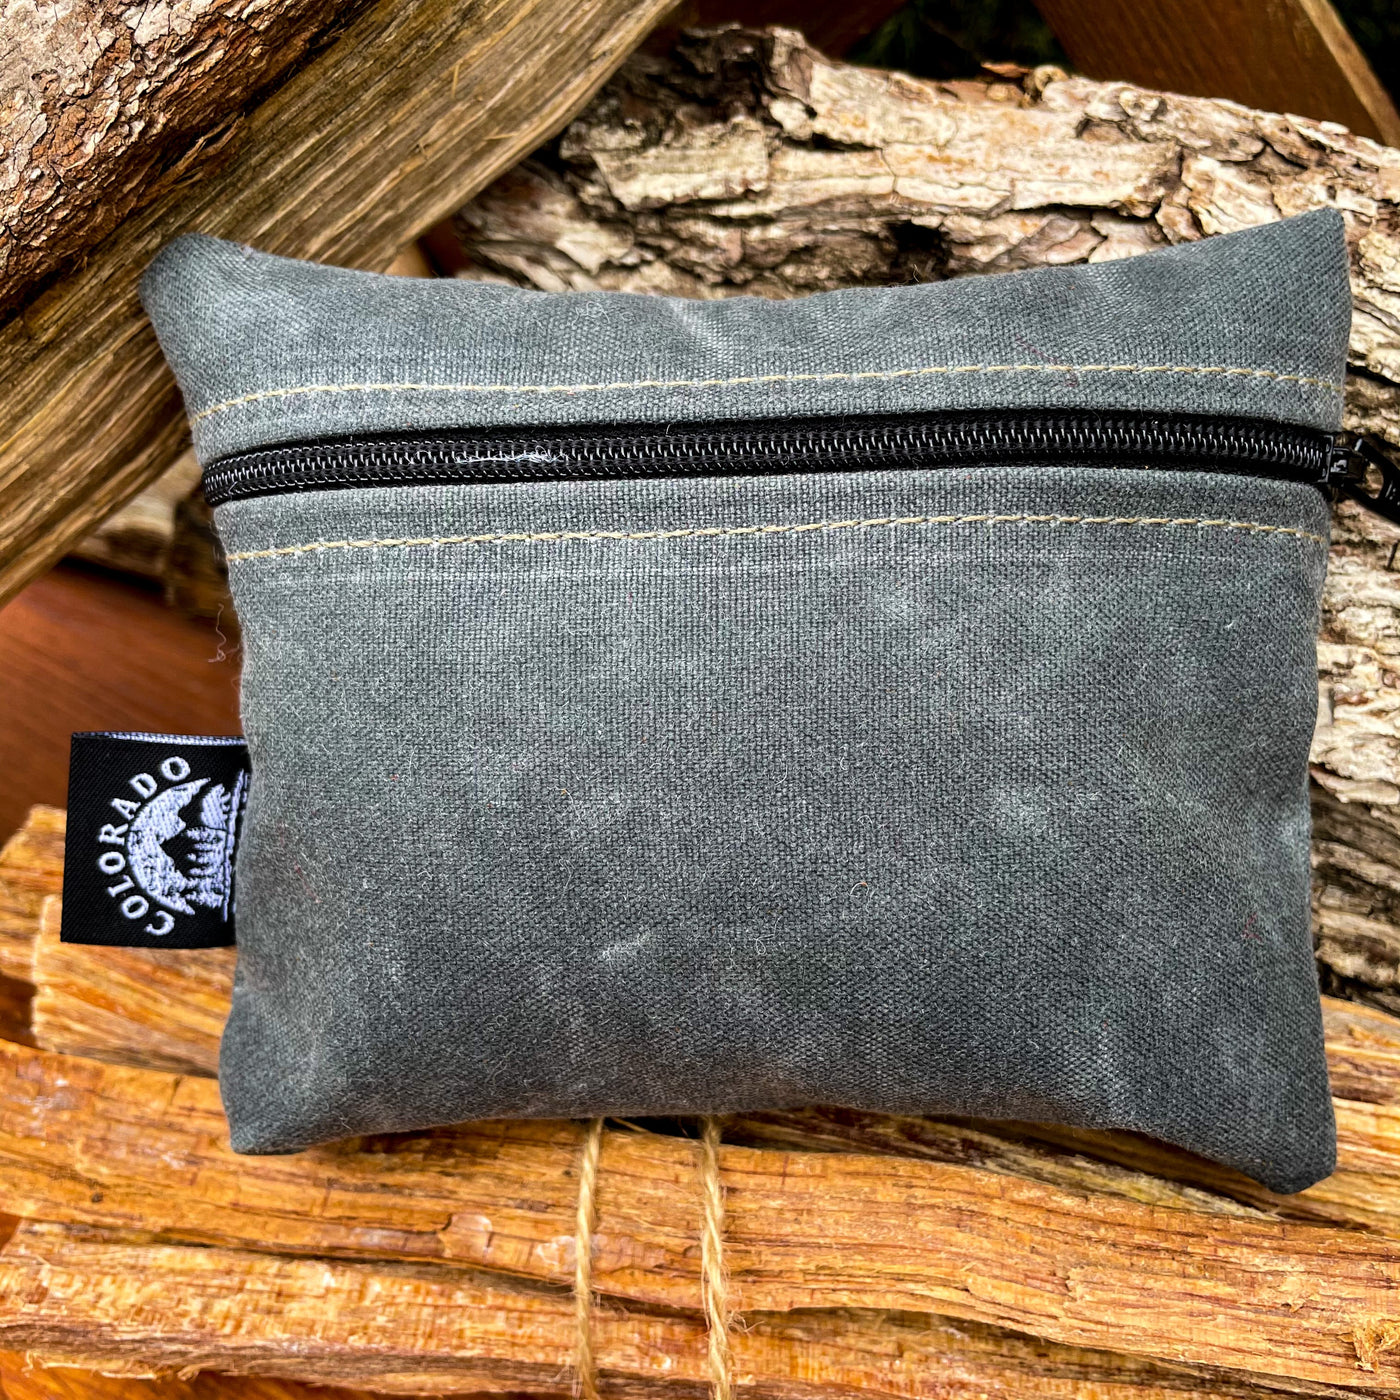 Waxed Canvas Traditional EDC Pocket Pouch Bushcraft Survival Camping Possibles Dopp Grooming (Various Colors)